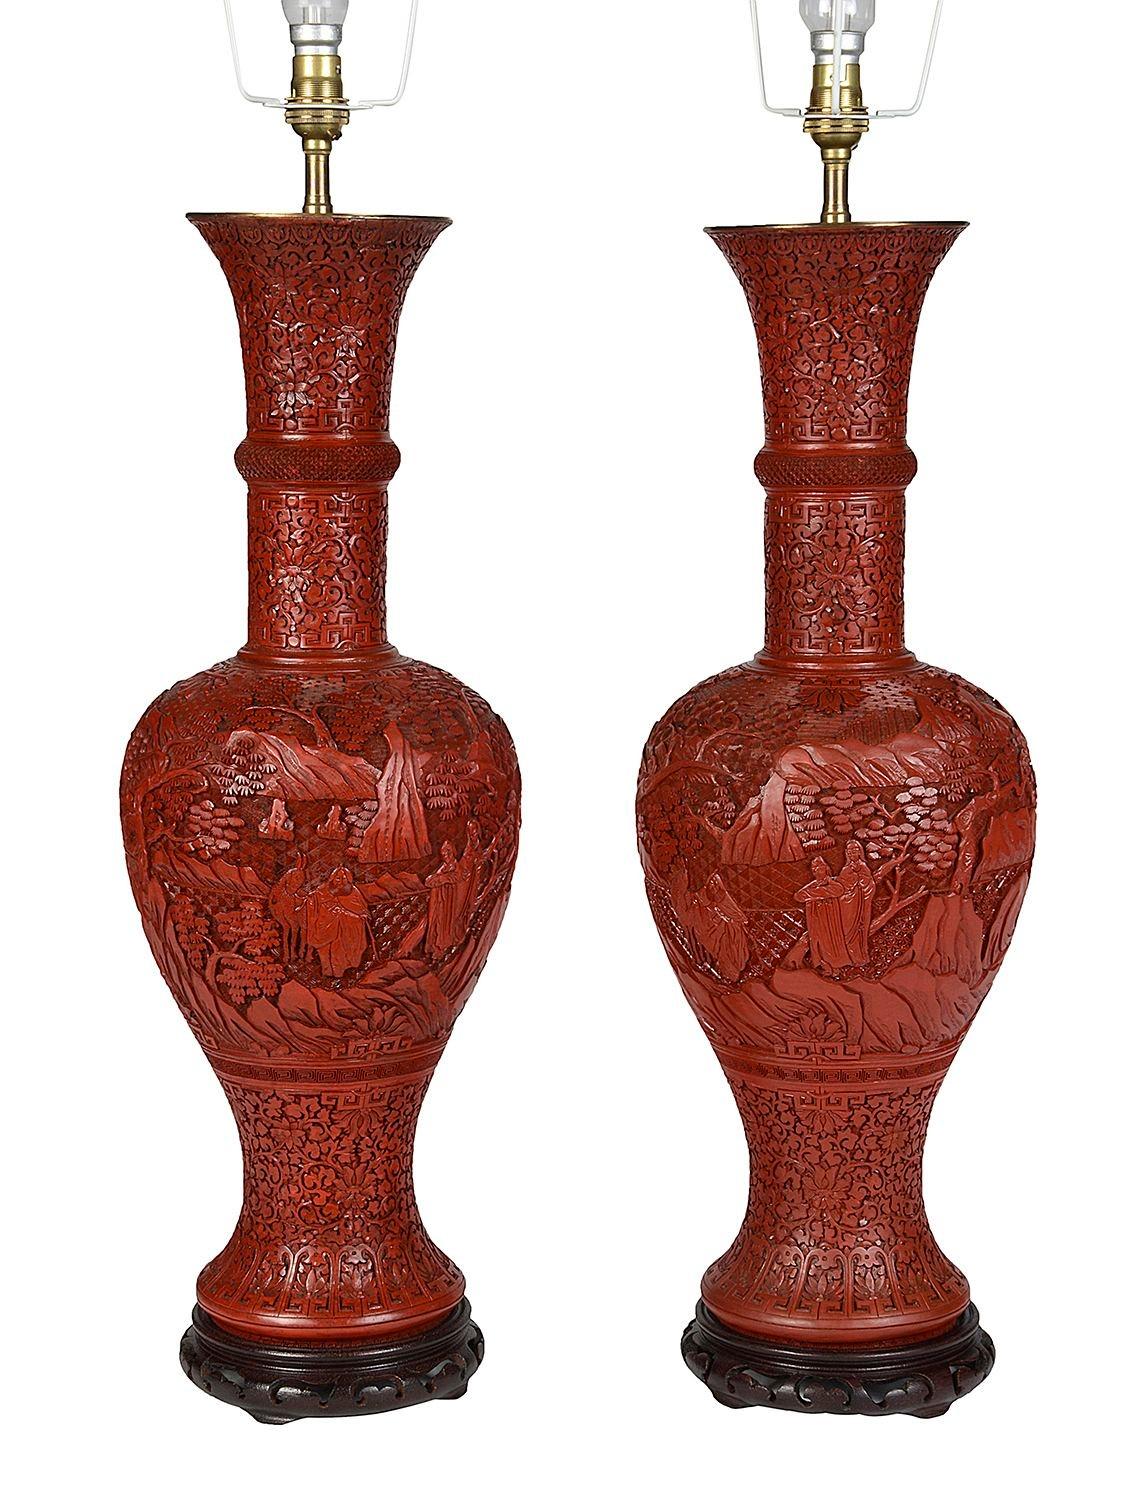 A very decorative and good quality pair of 18th Century style Chinese Cinnabar lacquer vases / lamps. Each with scrolling foliate and classical motif decoration to the ground and traditional scenes of various couriers, tradesmen in the gardens, with